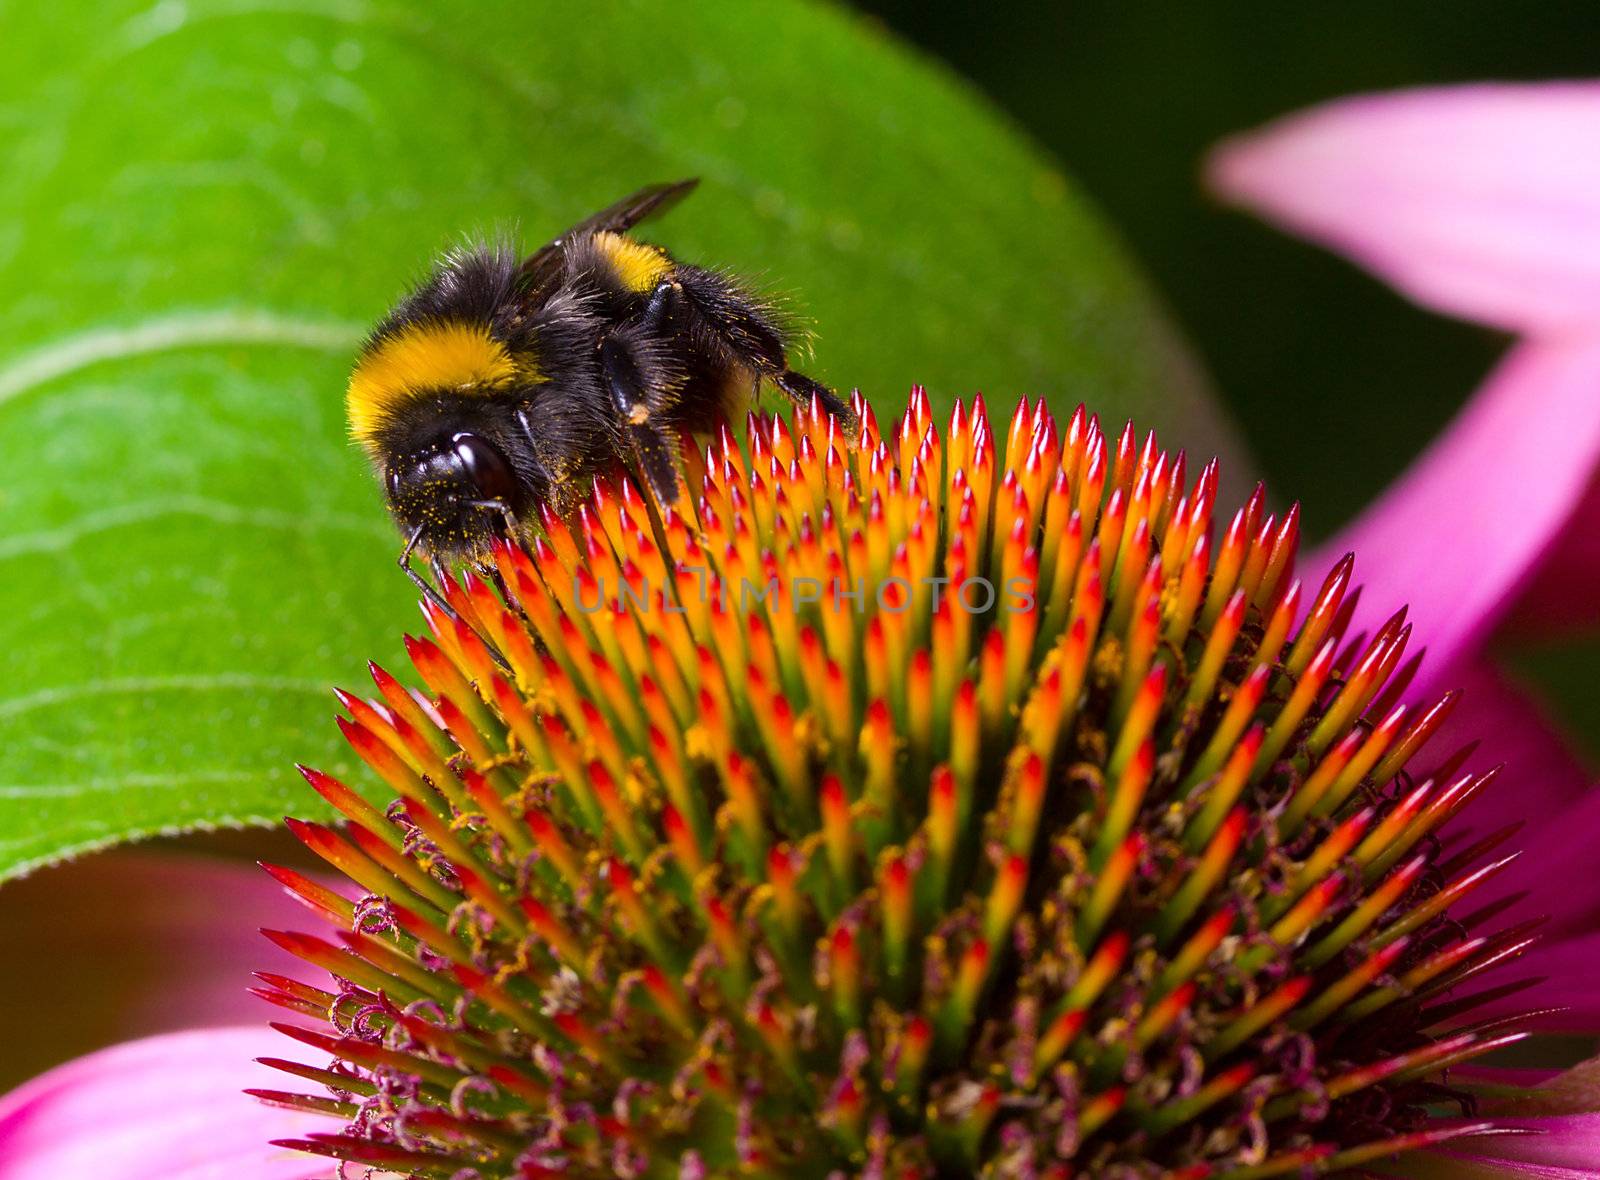 bumblebee pollinating flower by Alekcey